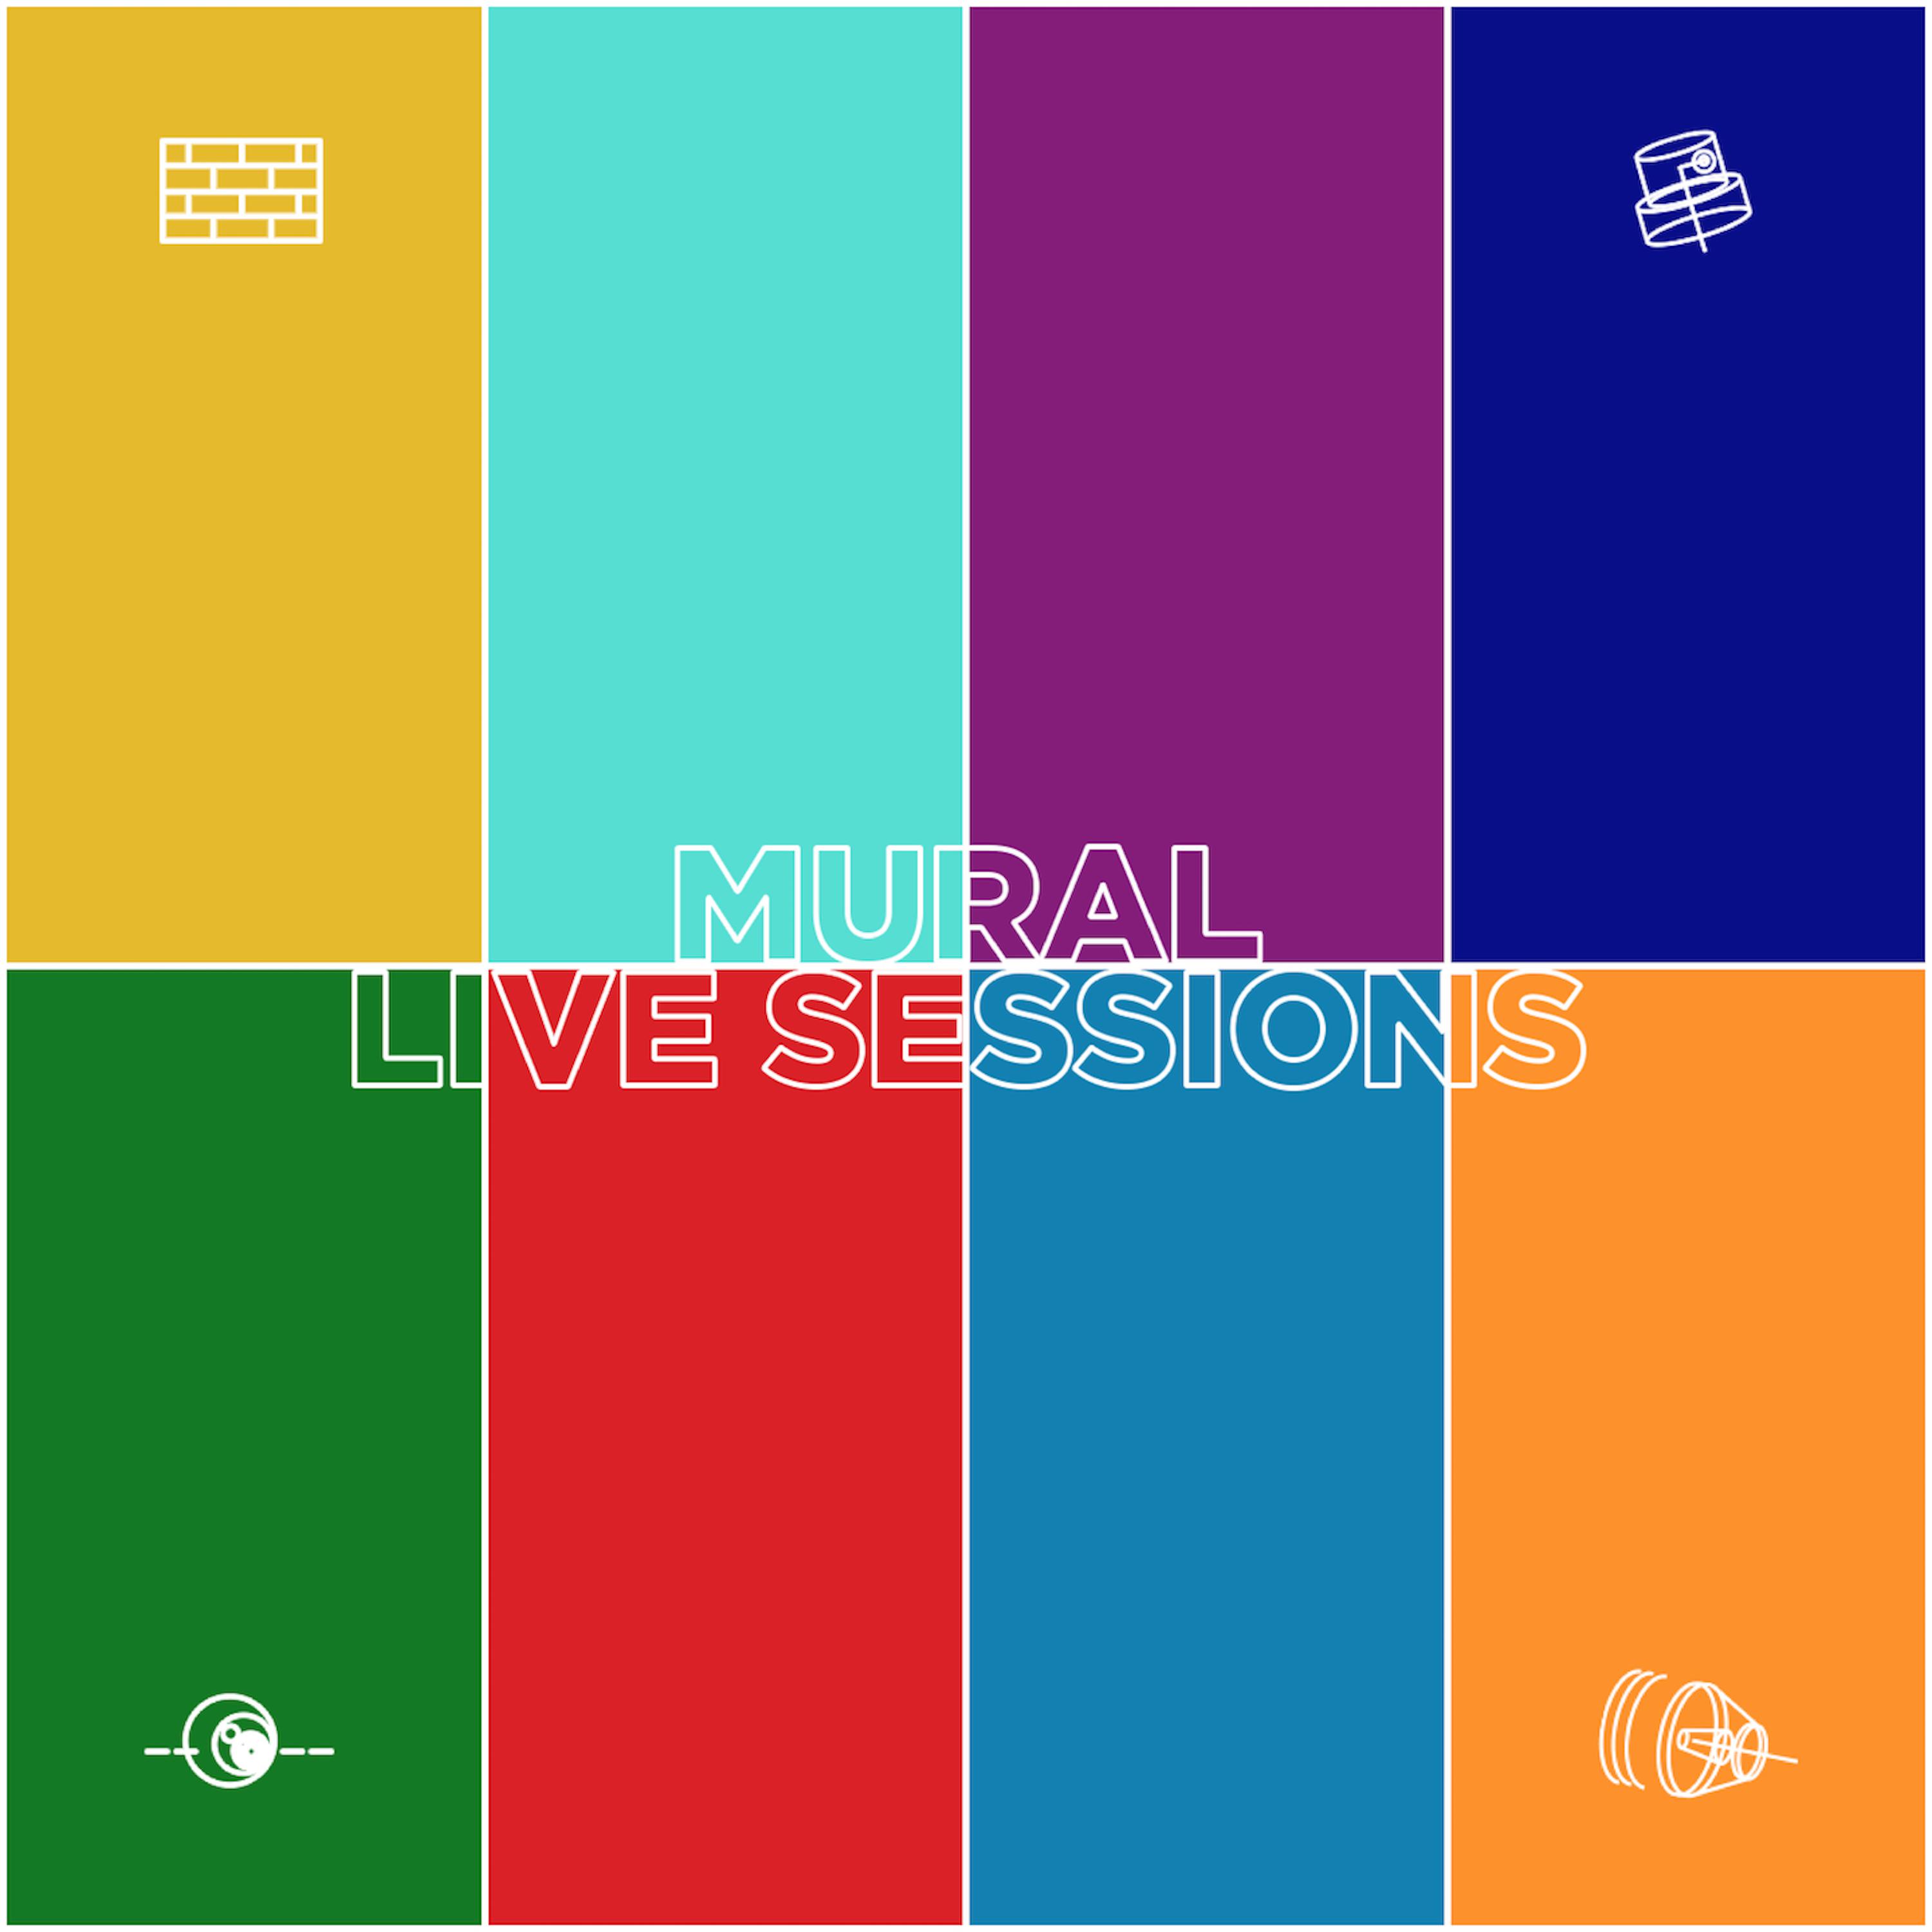 Mural Live Sessions